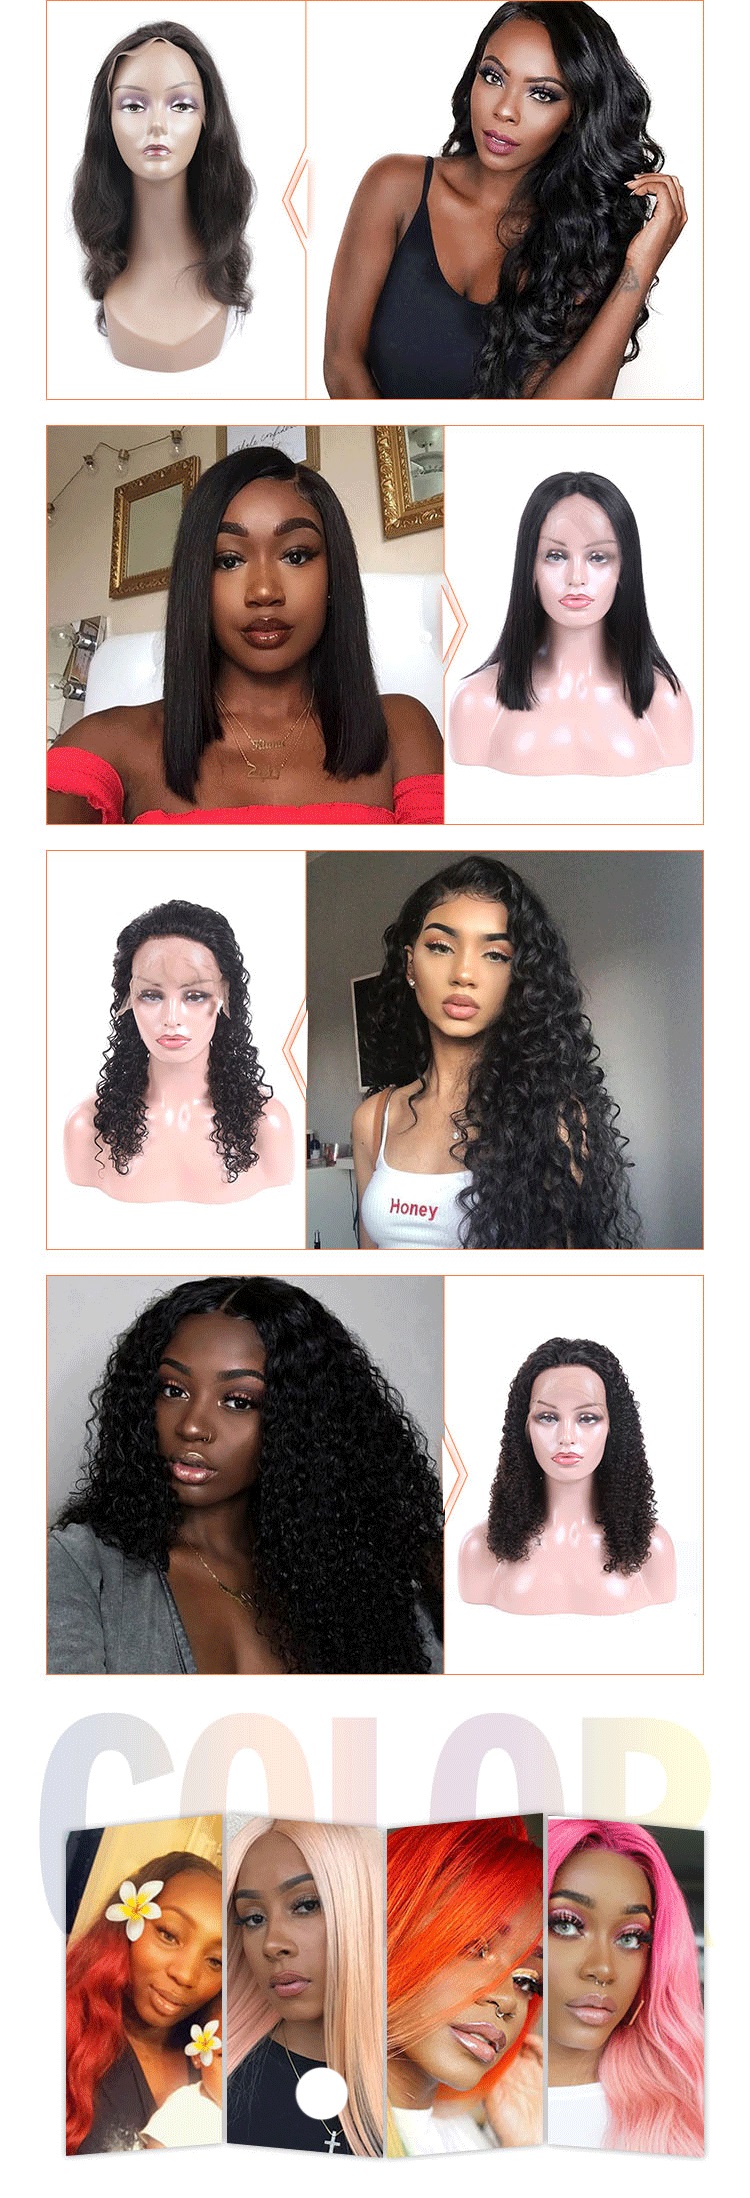 New arrival 100 percent brazilian human hair wigs,curly full lace virgin remy human hair wig